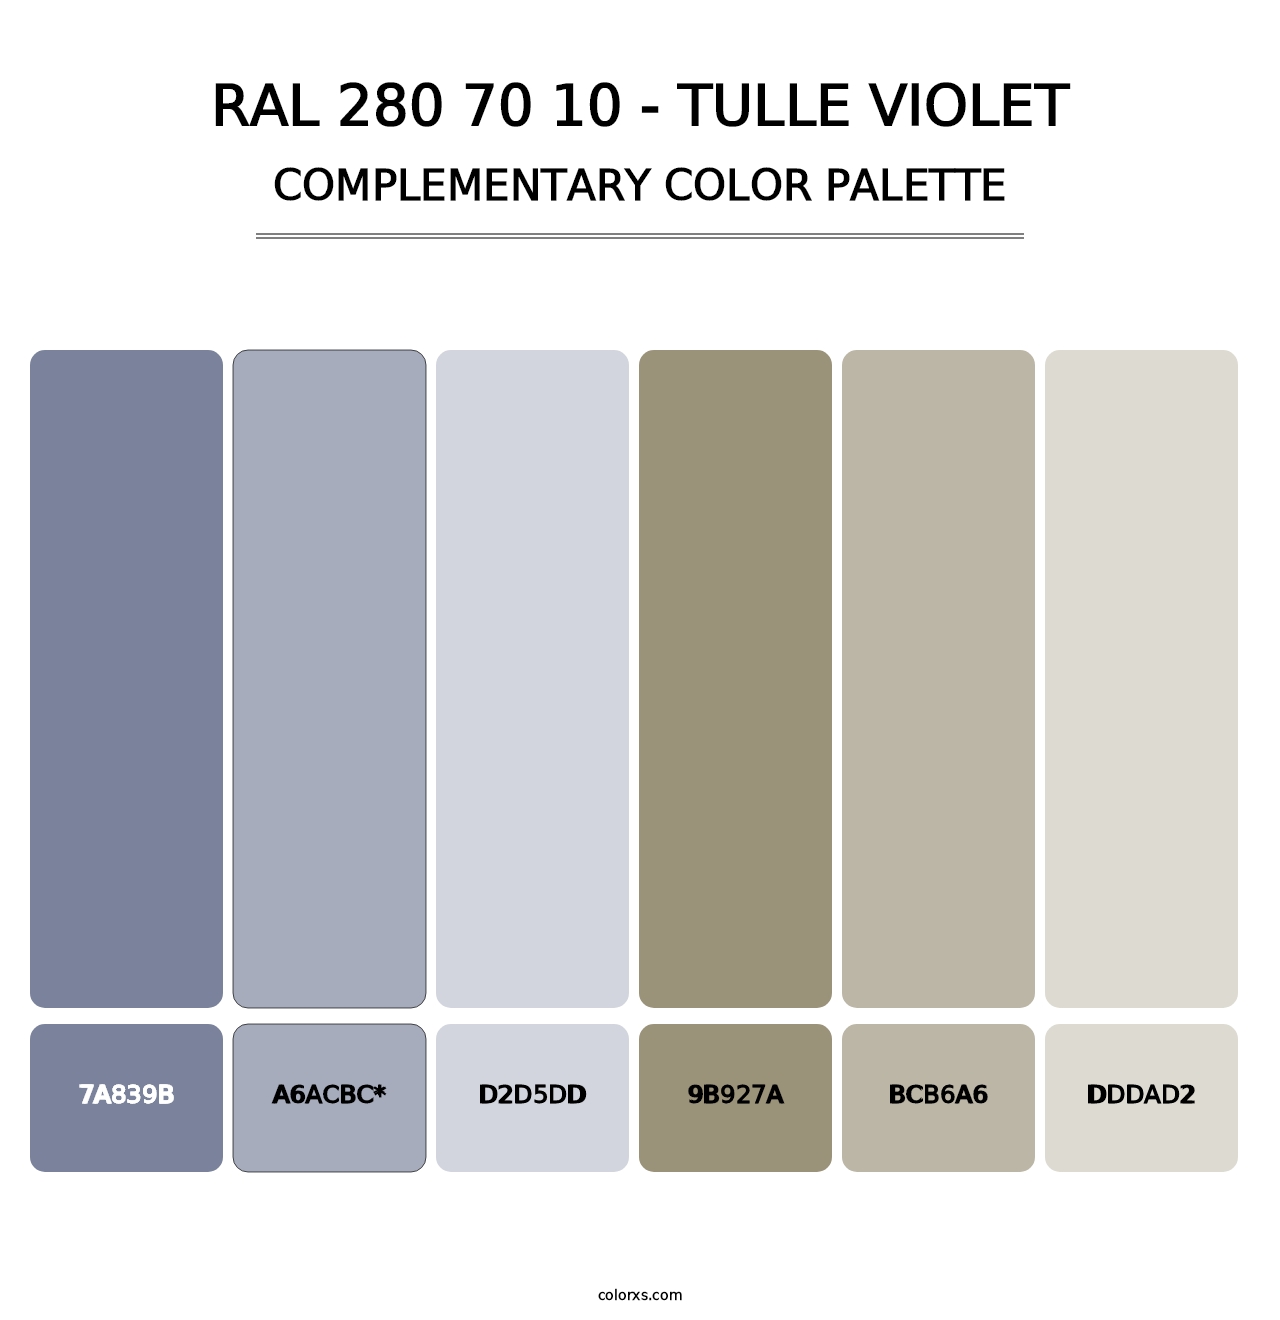 RAL 280 70 10 - Tulle Violet - Complementary Color Palette